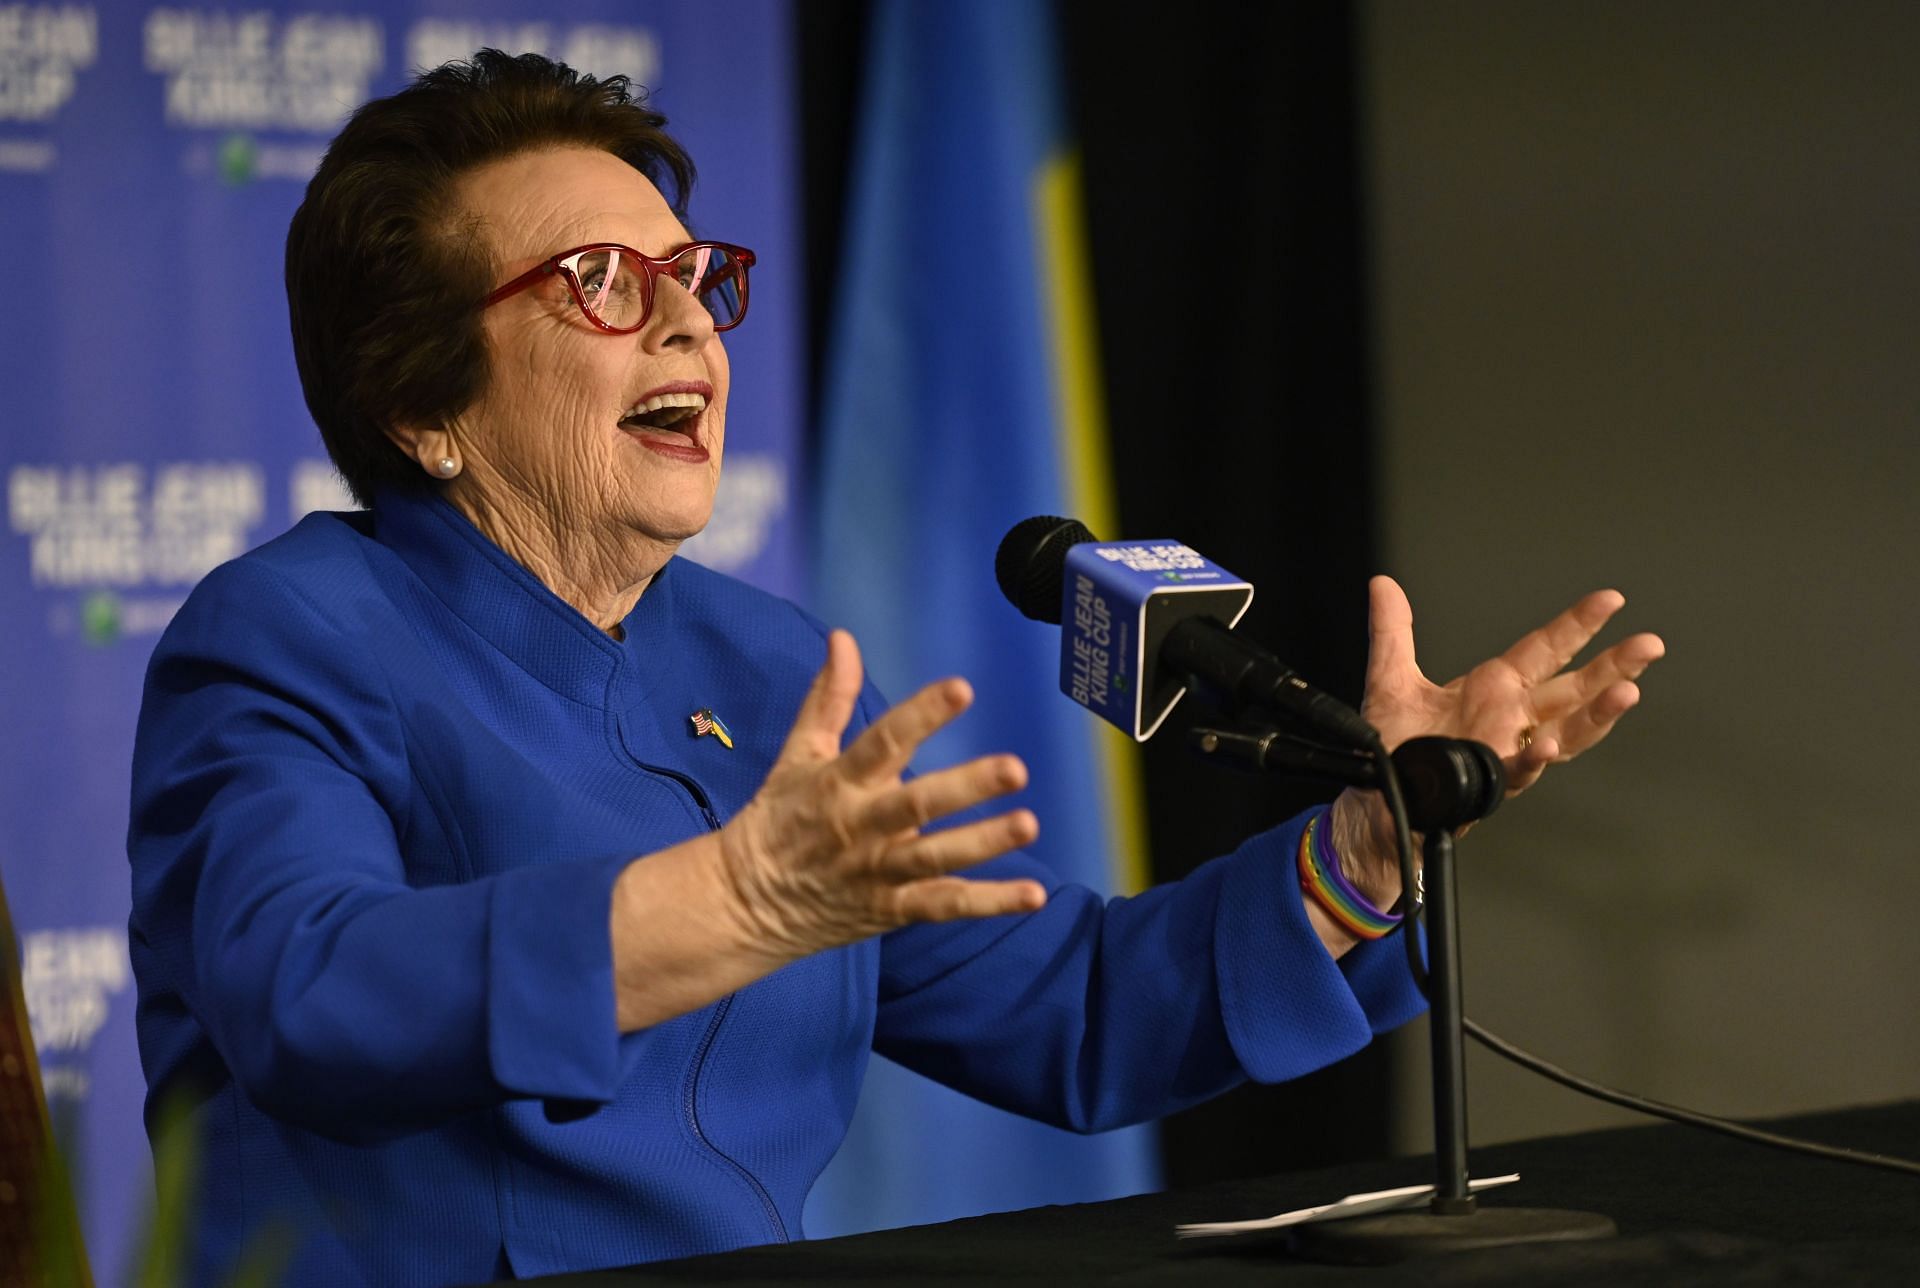 Billie Jean King talks about her battle for equality in the sport